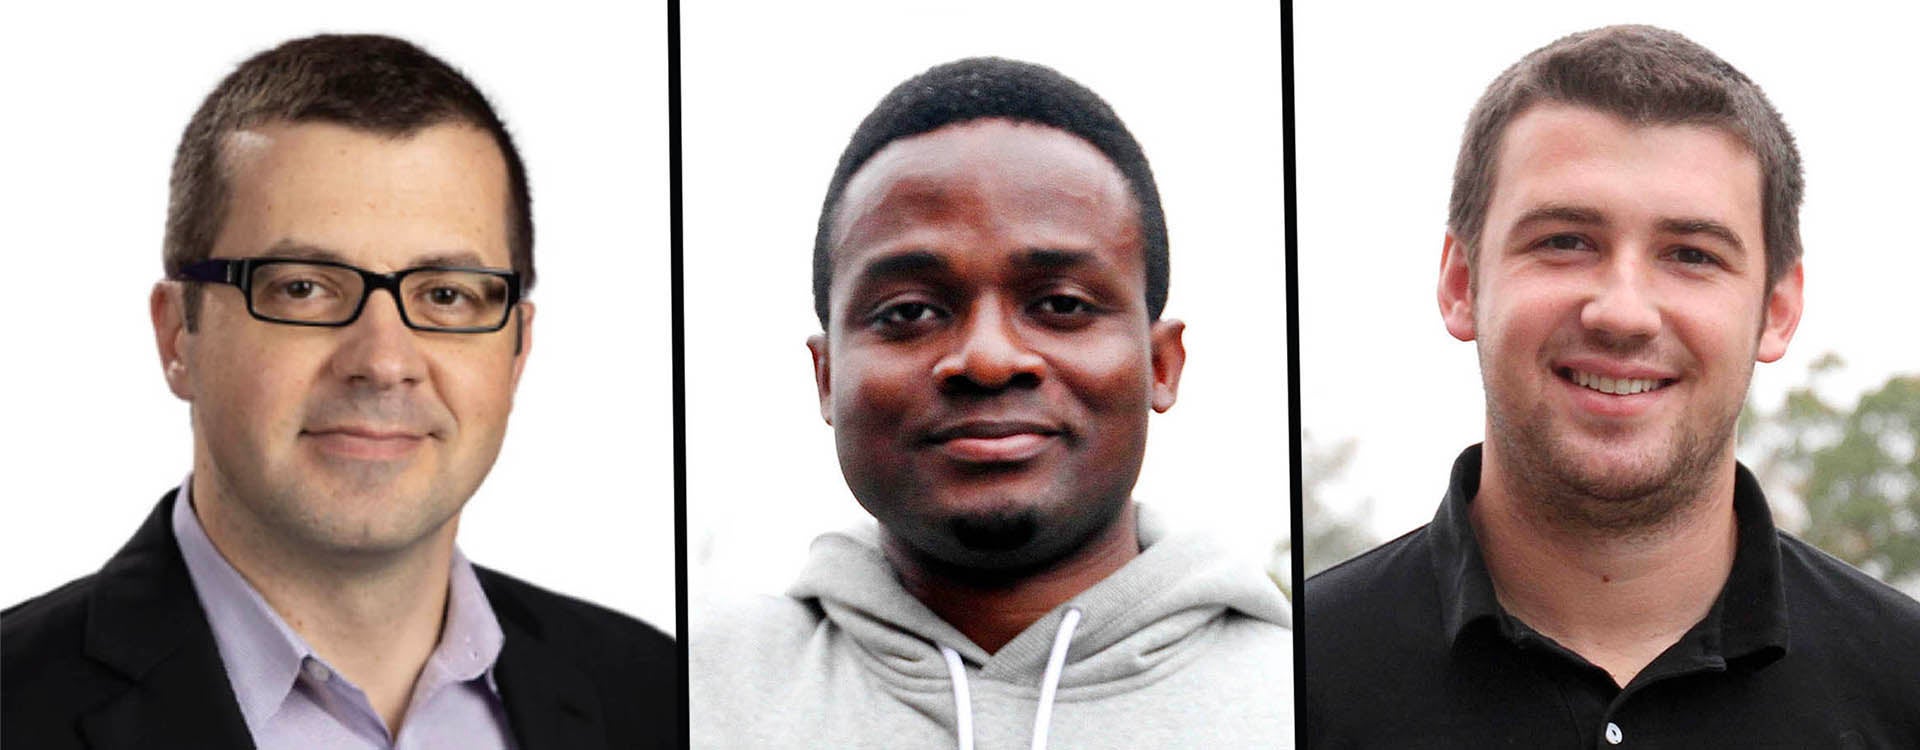 From left, Dr. Nic Herndon, assistant professor in the Department of Computer Science, and graduate students Kehinde “Kenny” Olufowobi and Mark Sokolov received international recognition for their research on the limitations of spam filters.